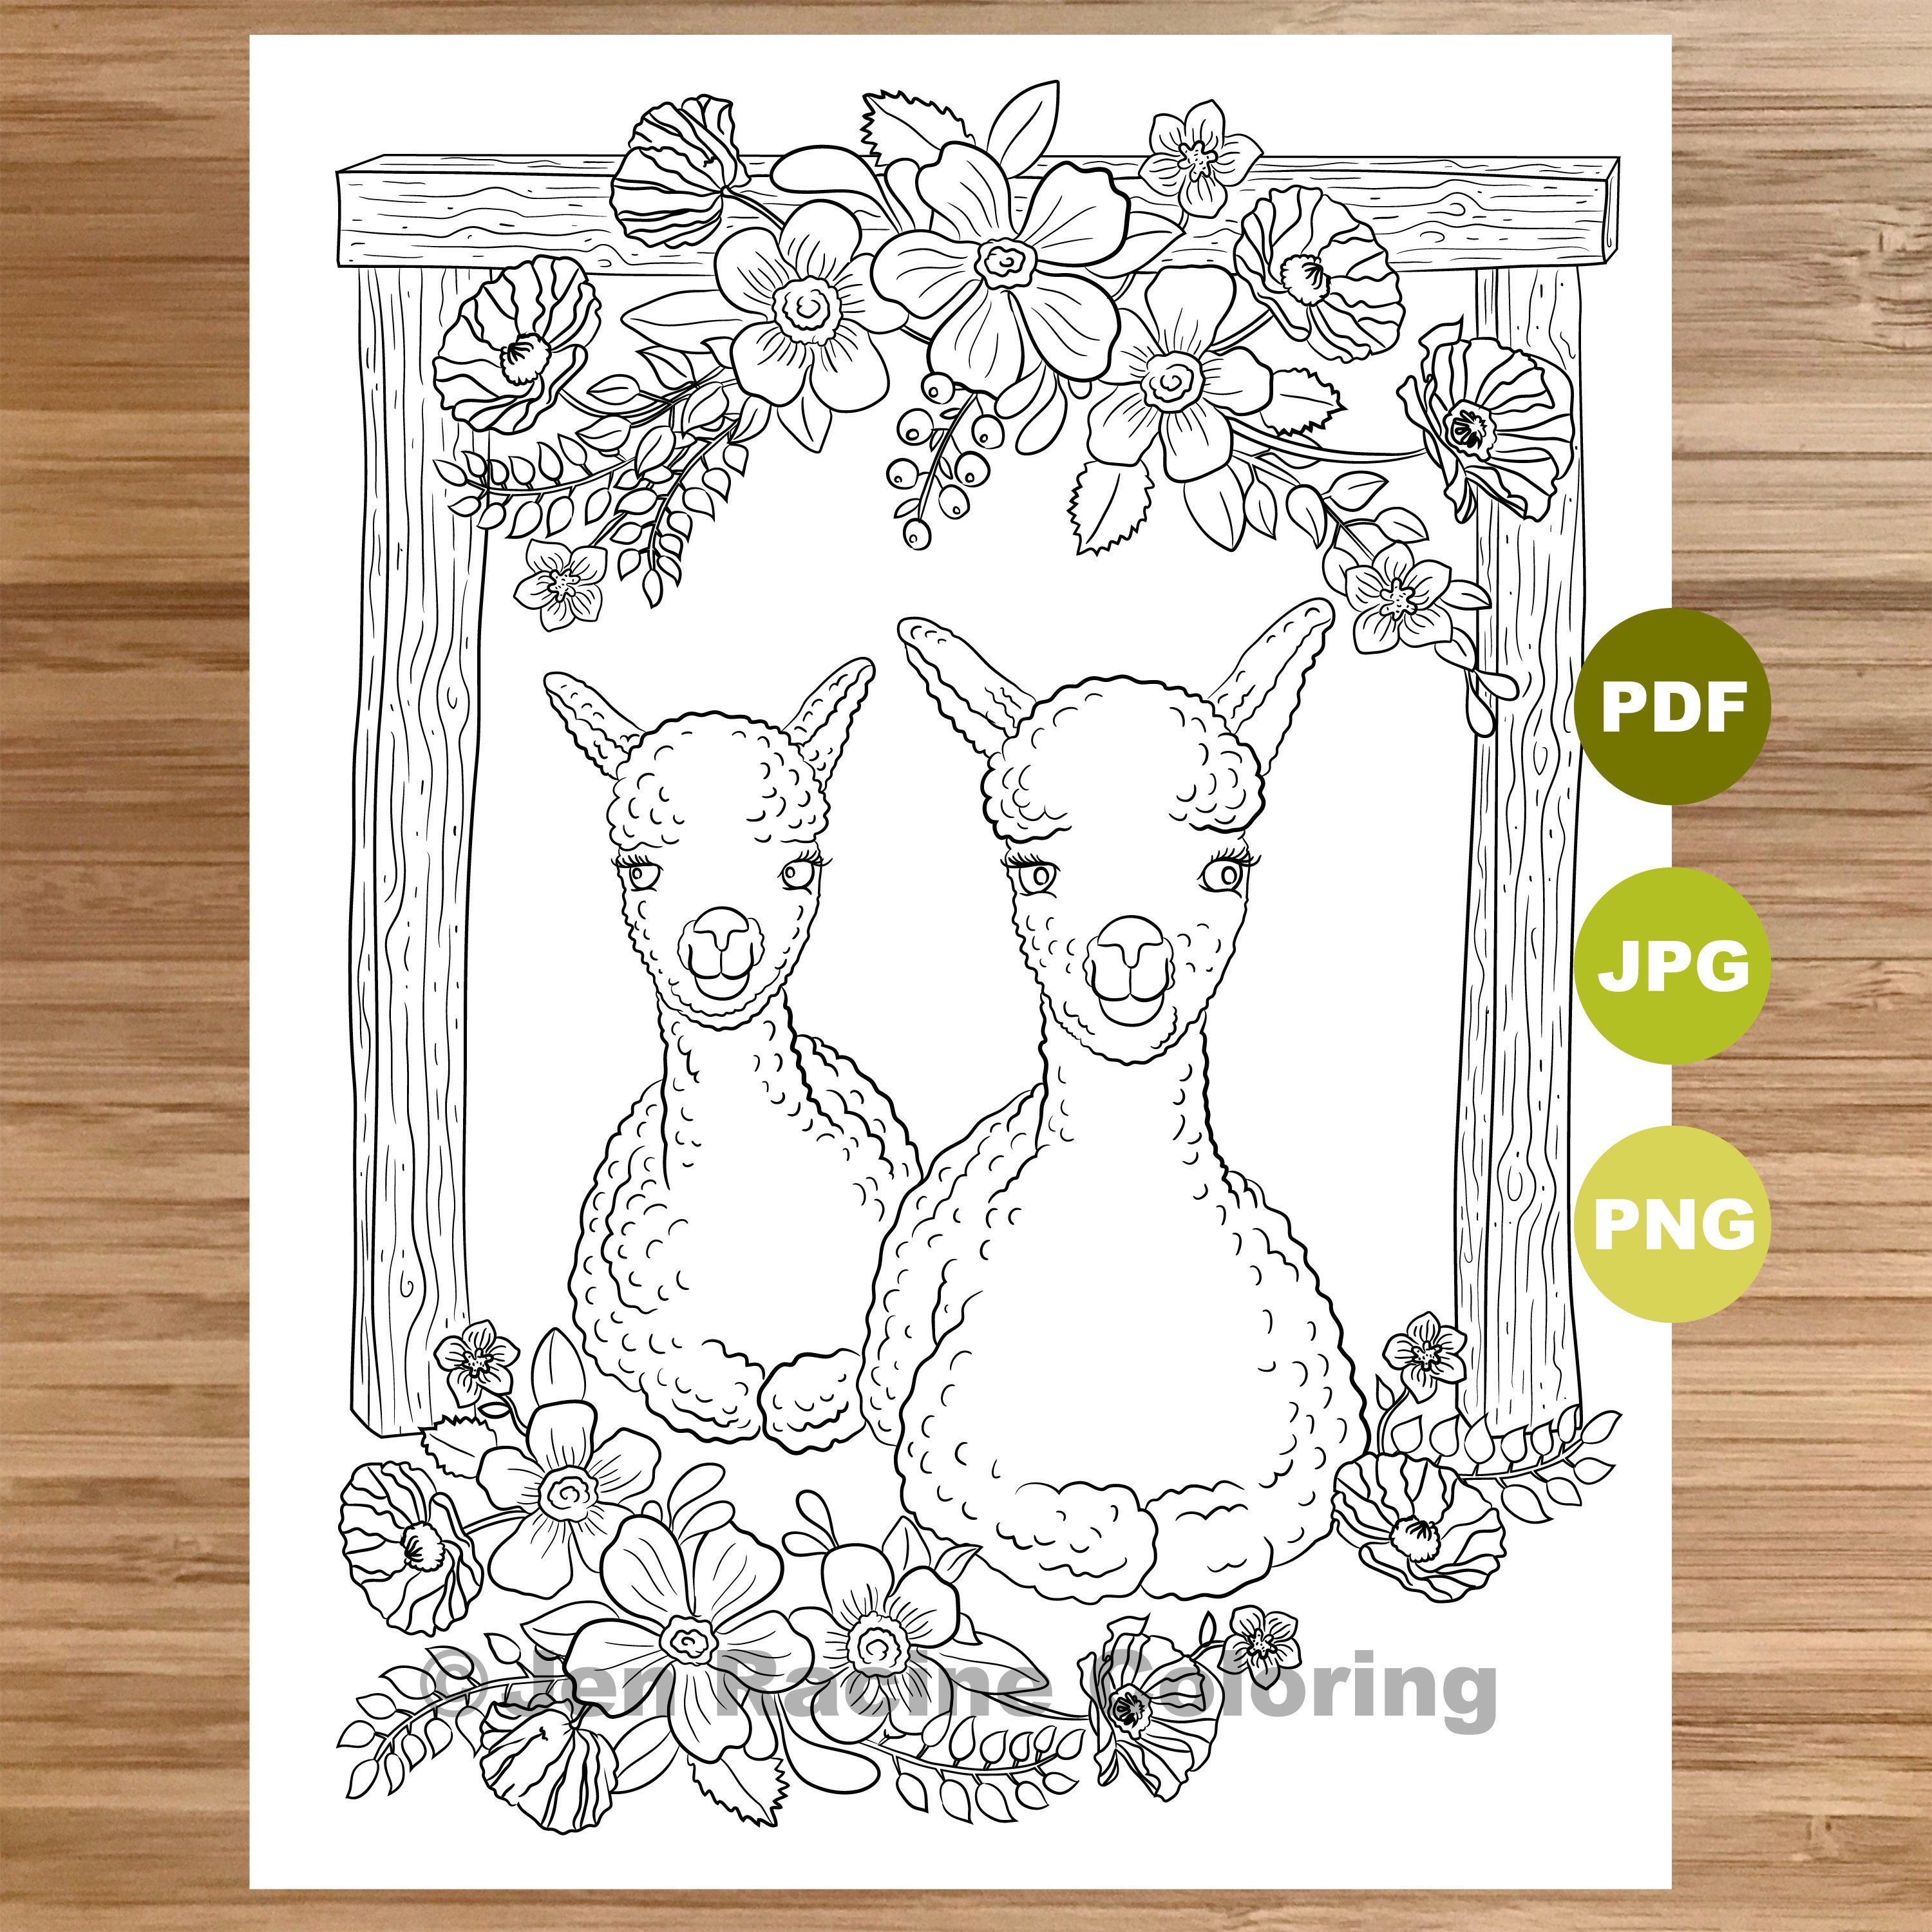 Sweet Sitting Llamas Coloring Page, Llama art, Coloring book printable,  Coloring pages for adults, Coloring pages for kids